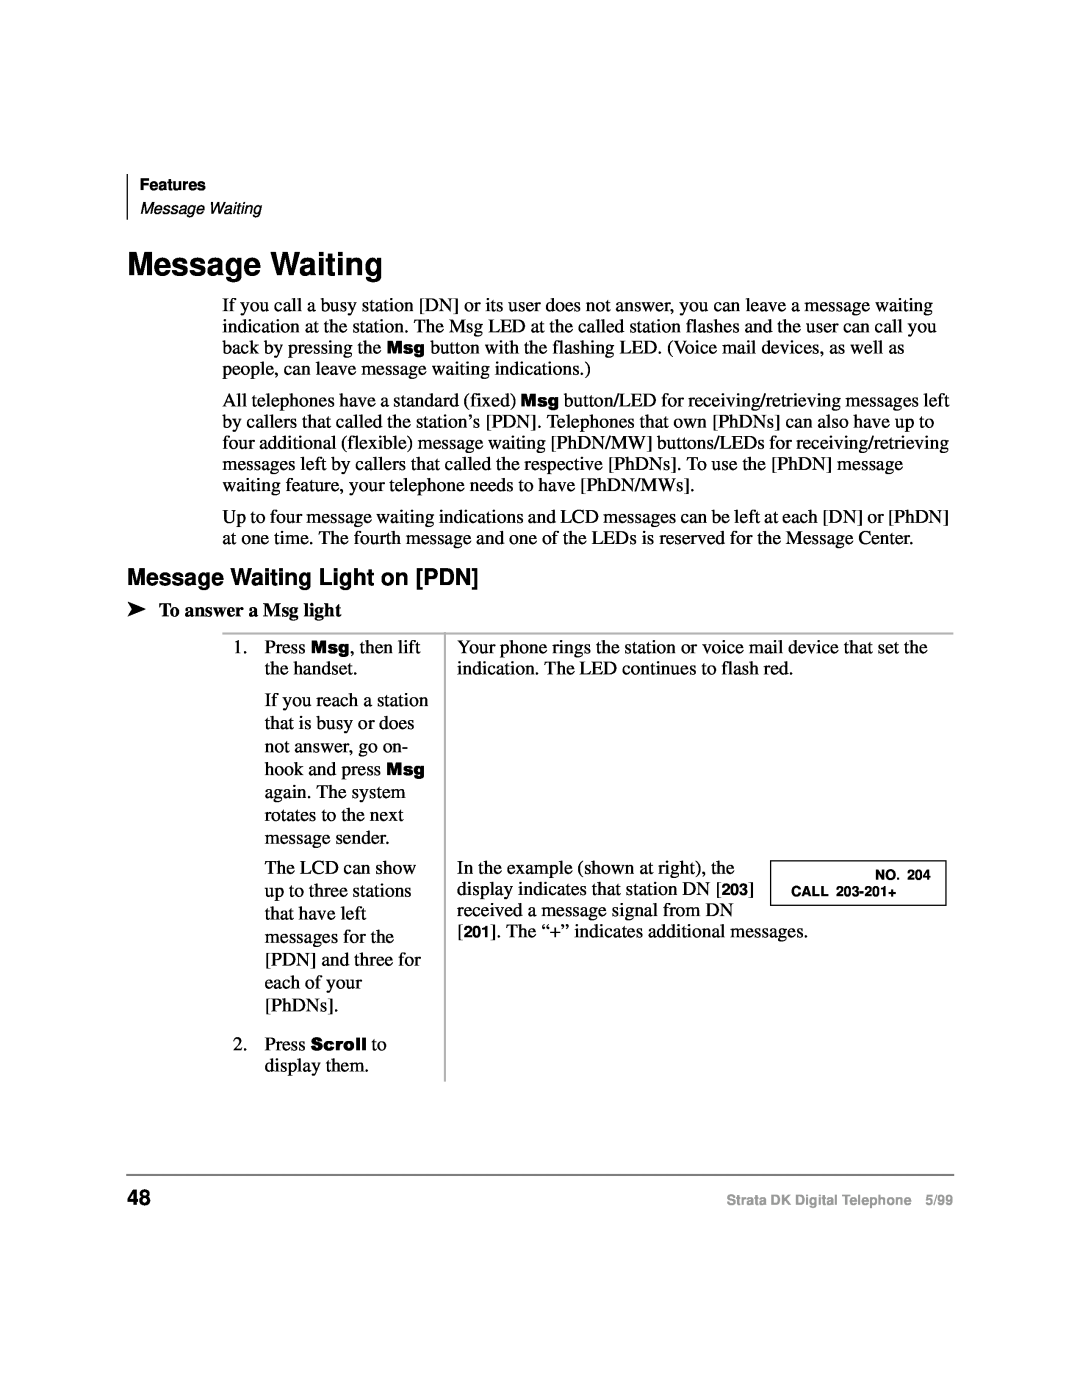 Toshiba CT manual Message Waiting Light on PDN, To answer a Msg light 